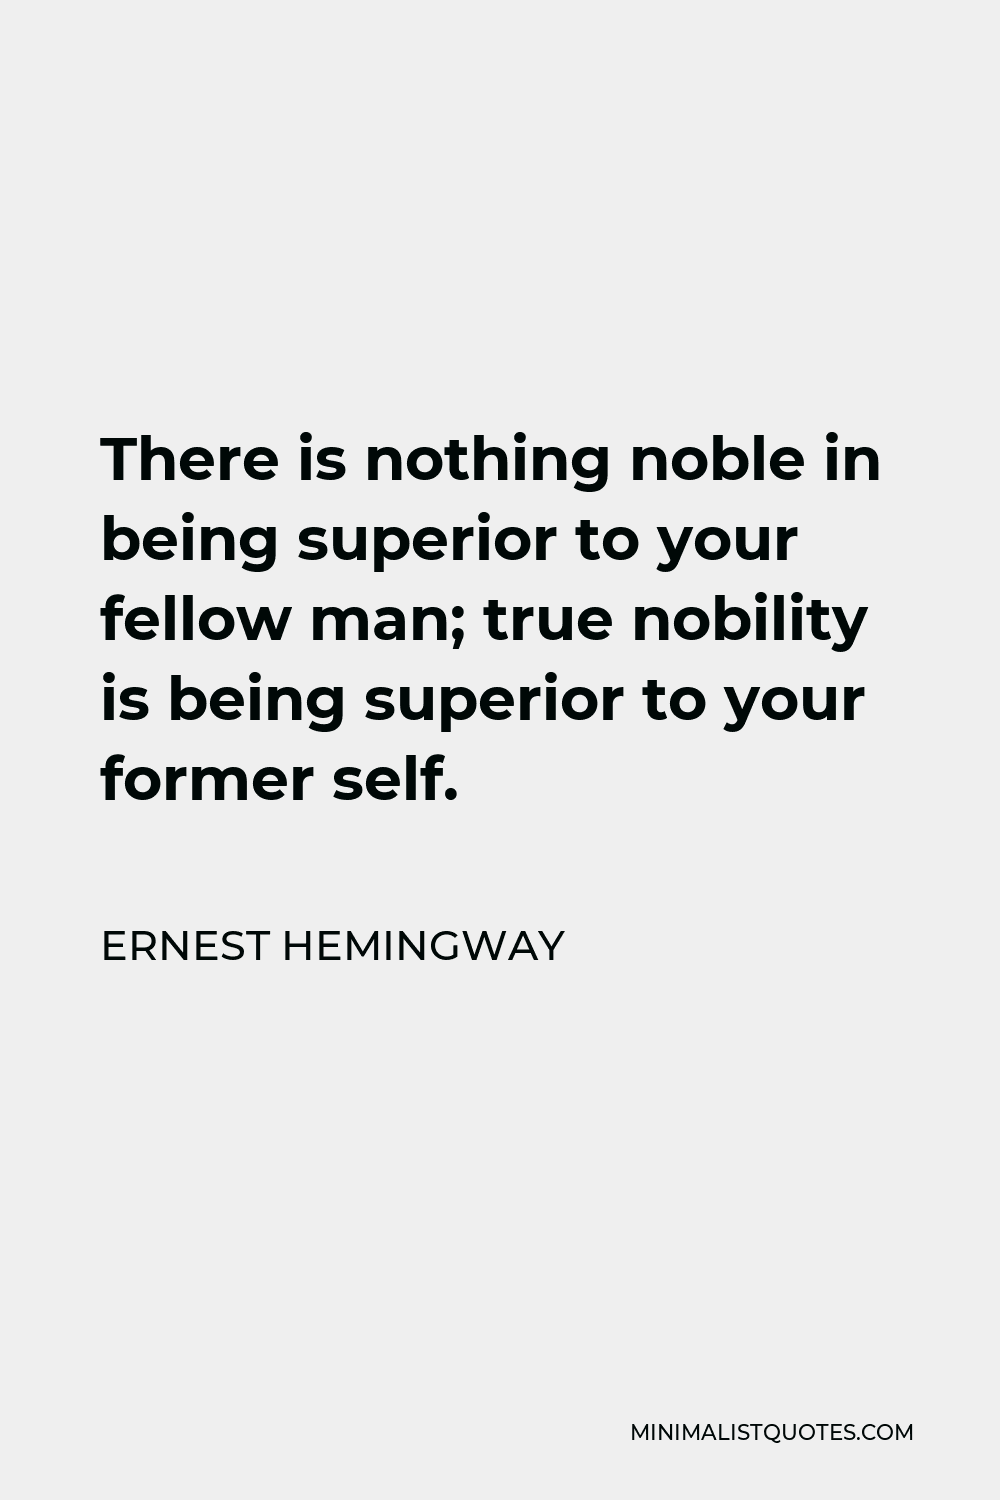 Ernest Hemingway Quote - There is nothing noble in being superior to your fellow man; true nobility is being superior to your former self.